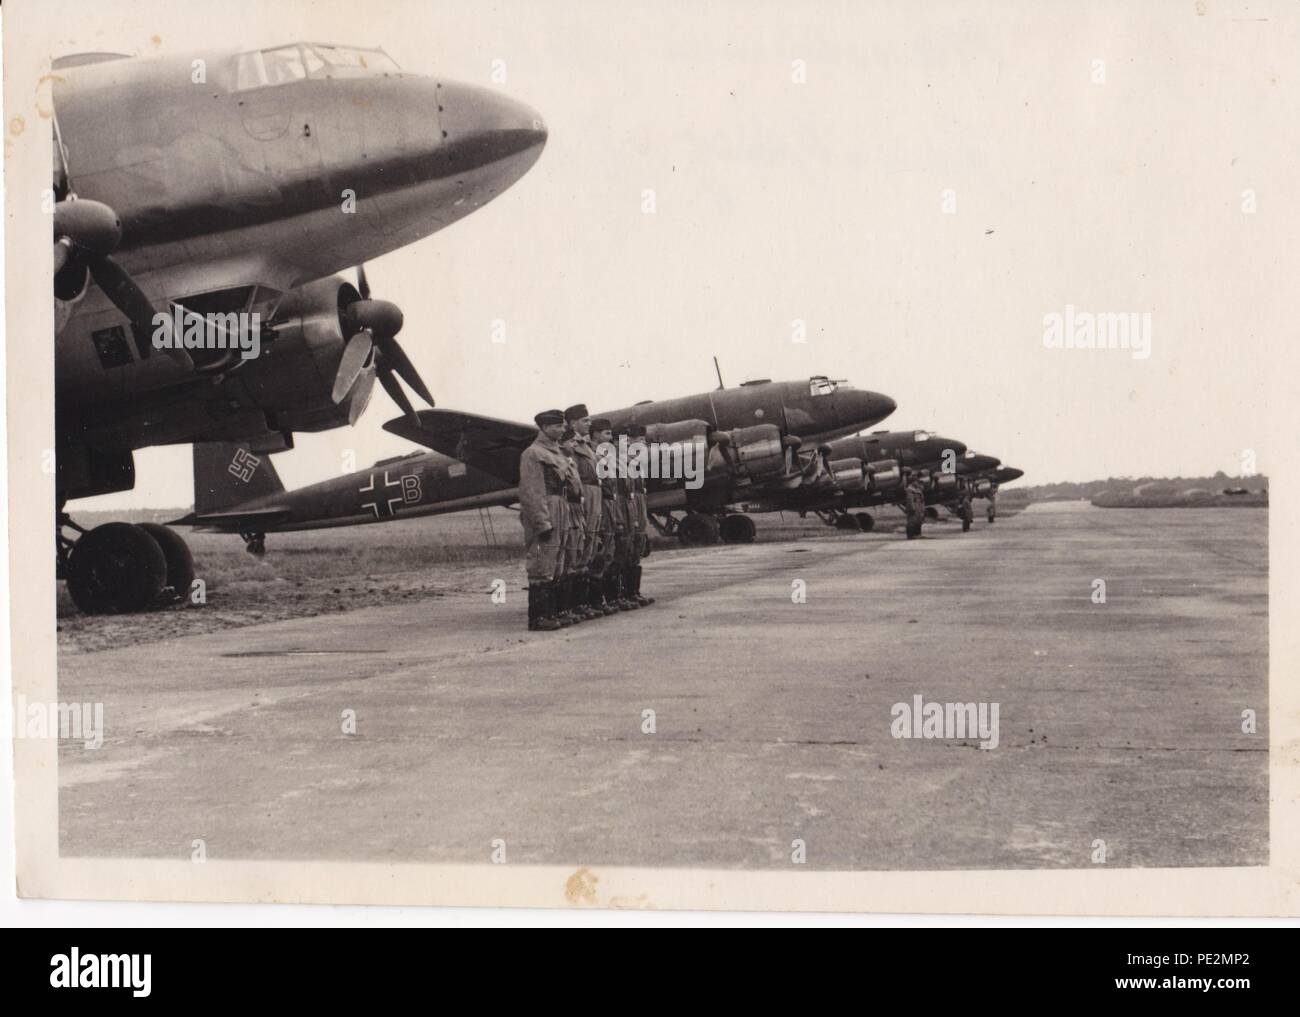 Image from the photo album of Oberfeldwebel Karl Gendner of 1. Staffel, Kampfgeschwader 40: Oberfeldwebel Karl Gendner and his crew from 1./KG 40 (in foreground) with Focke Wulf FW 200 Condor aircraft and crews of I. Gruppe KG 40, ready for a mission on 28th June 1941. The censor has removed the KG 40 emblems on the front of the aircraft. Stock Photo